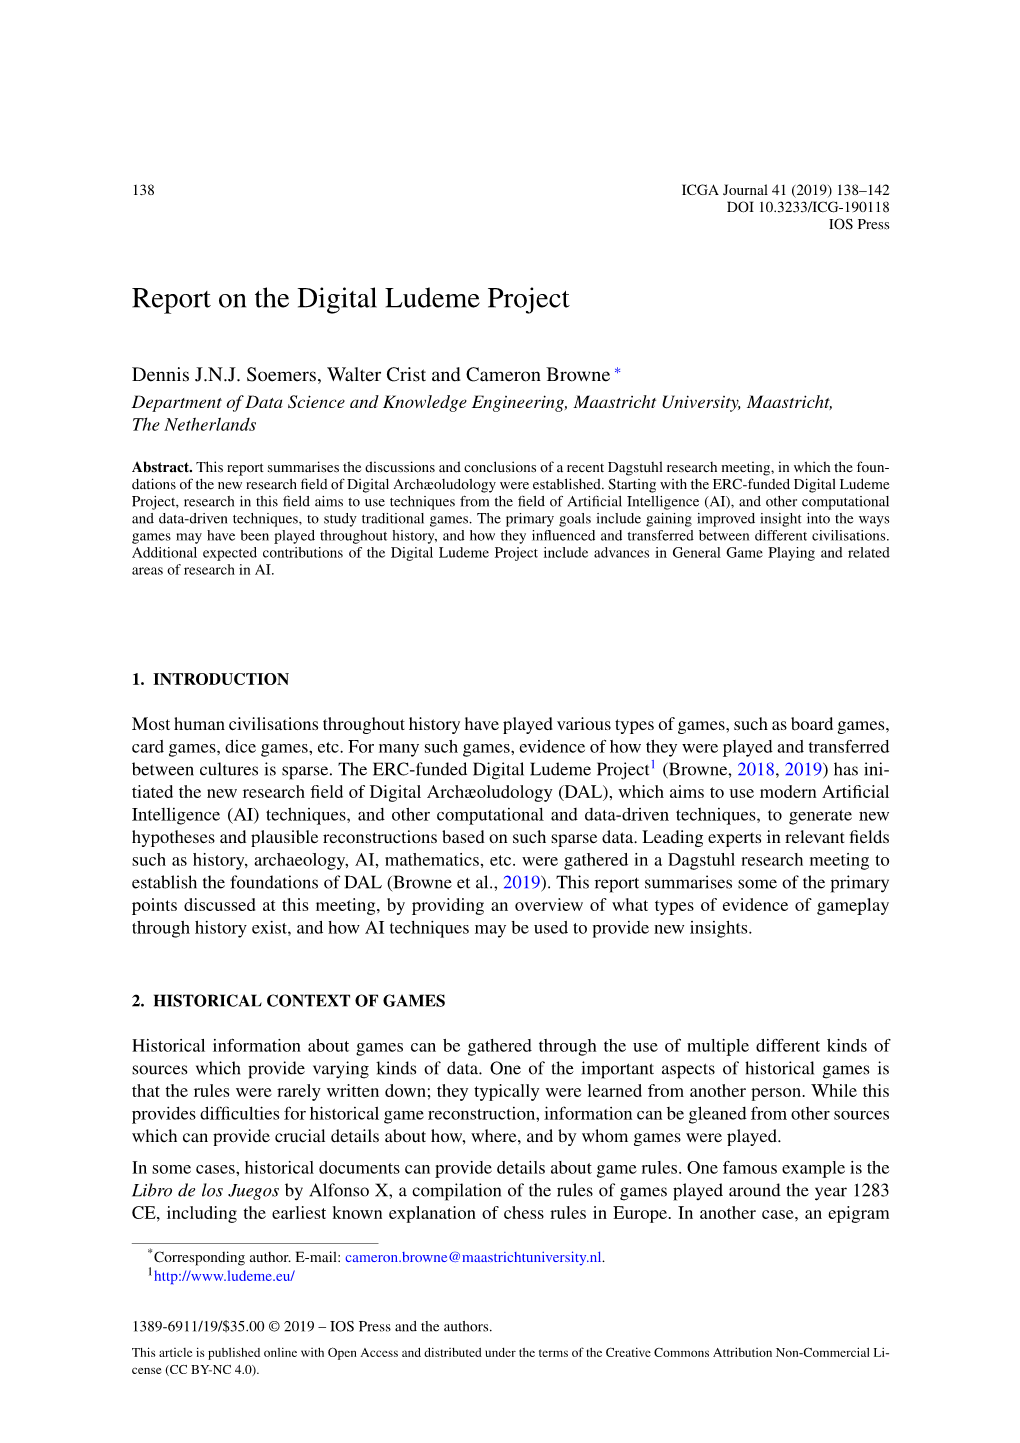 Report on the Digital Ludeme Project